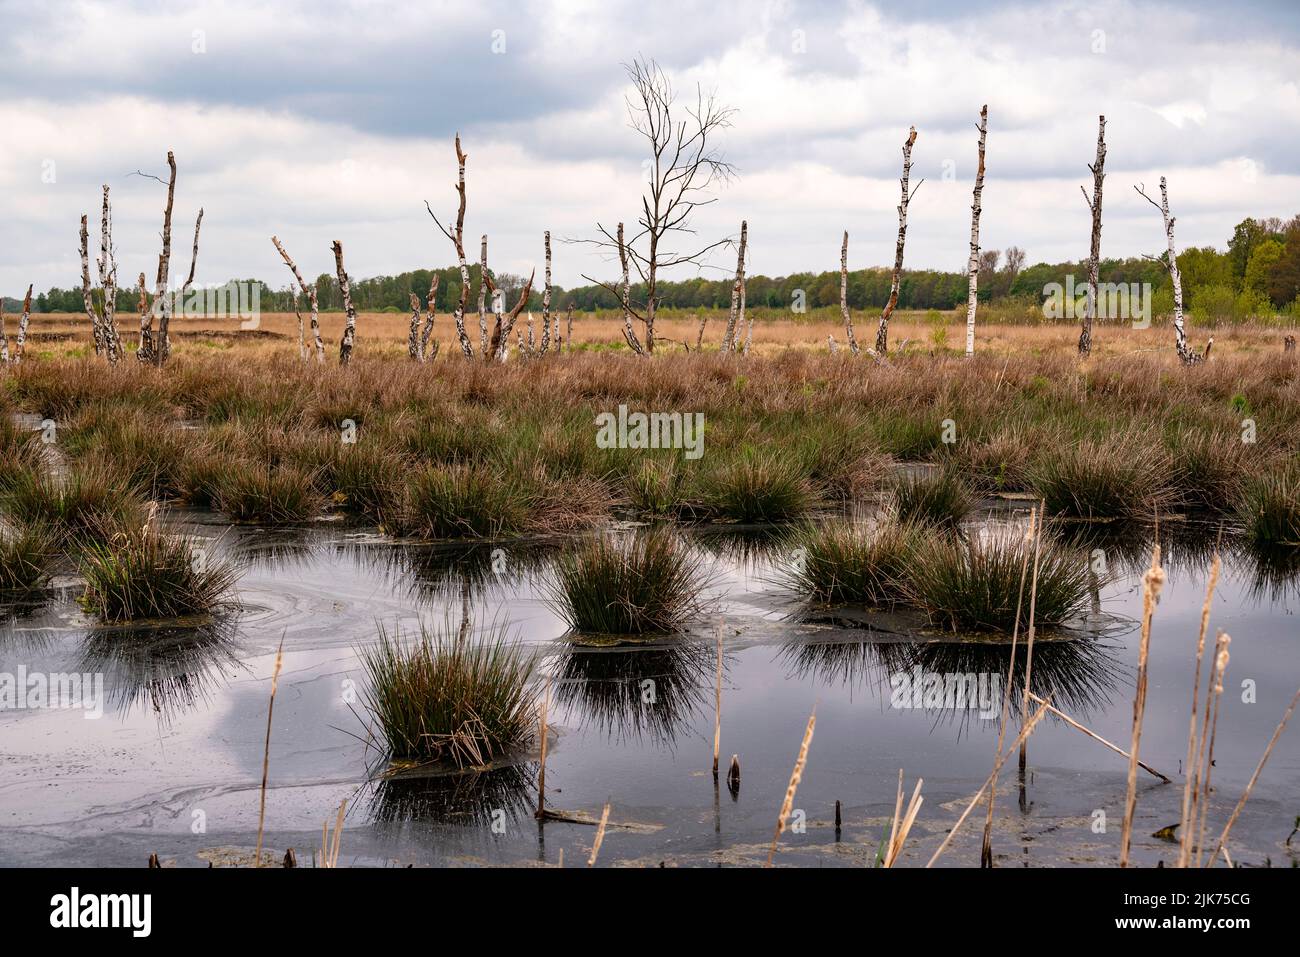 Gloomy landscape with old birch trunks at the 'Großes Torfmoor' raised bog, Hille, North Rhine-Westphalia, Germany Stock Photo